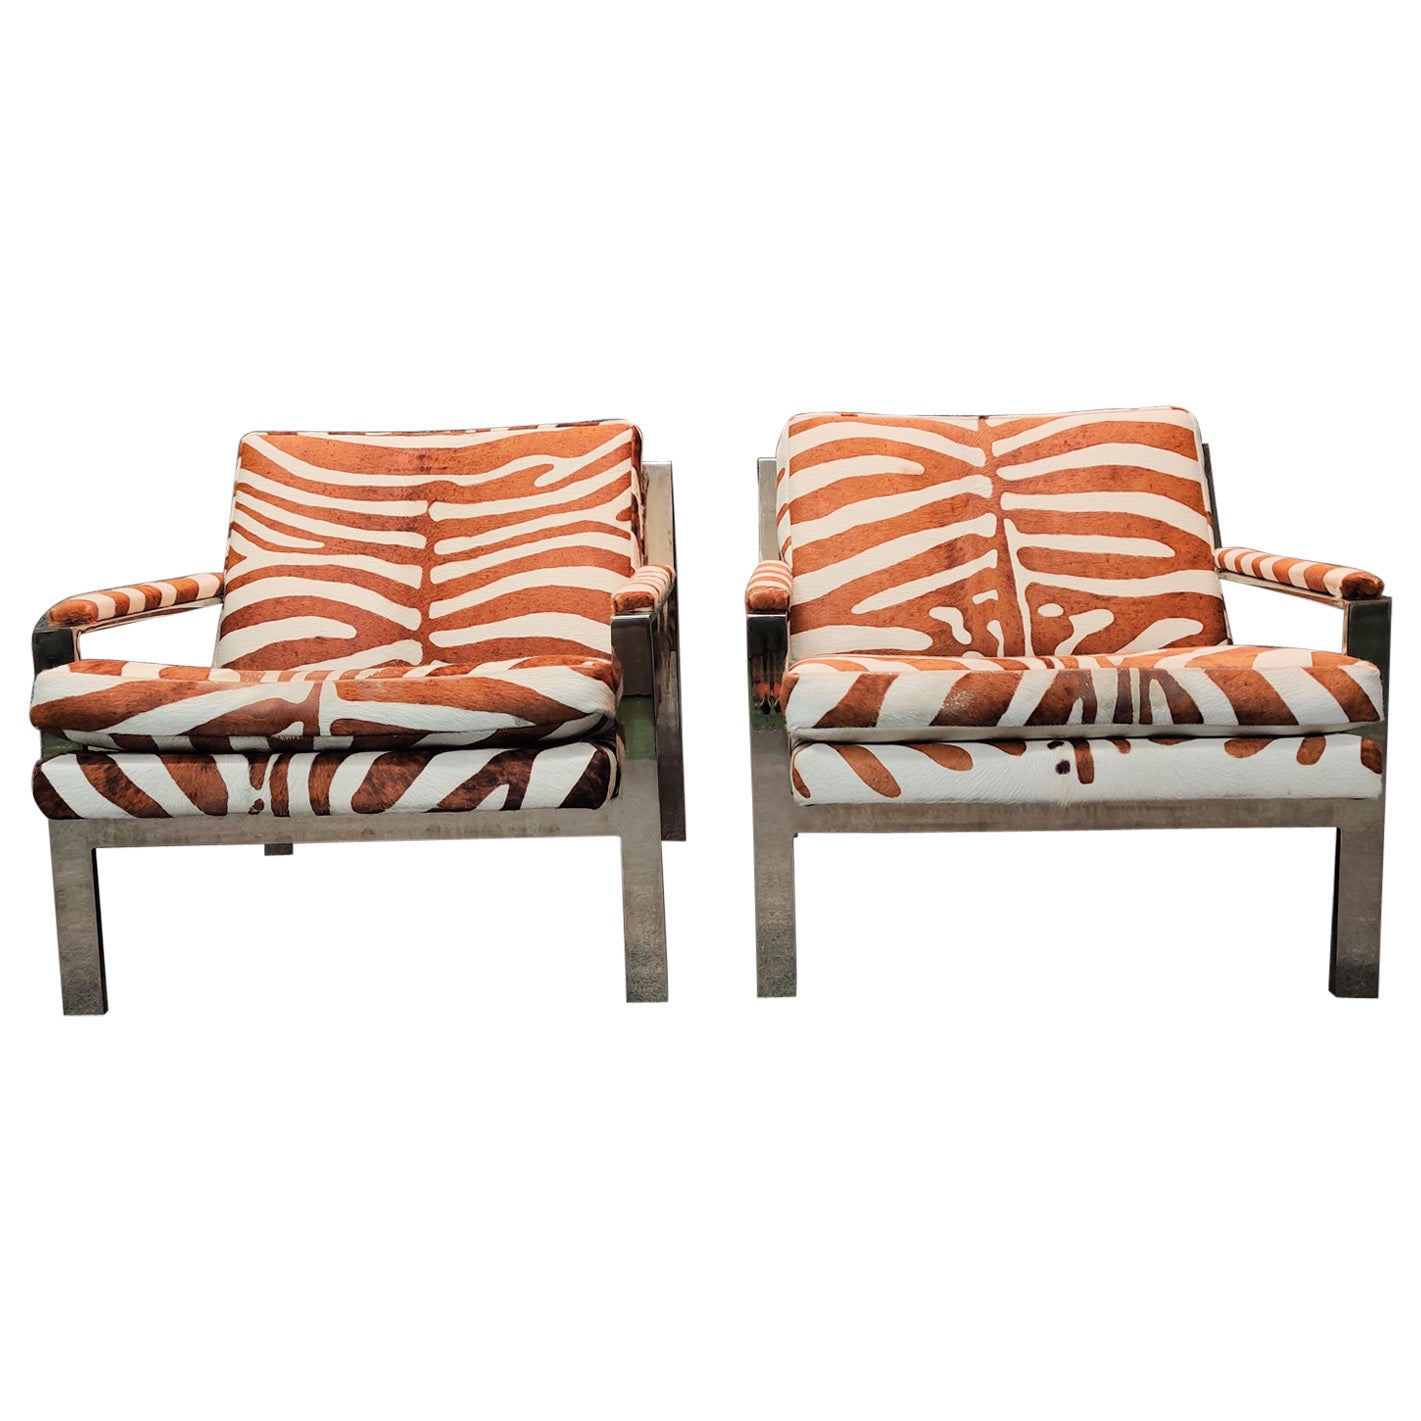 Pair of Cy Mann Attributed Flat Bar Lounge Chairs in Cowhide